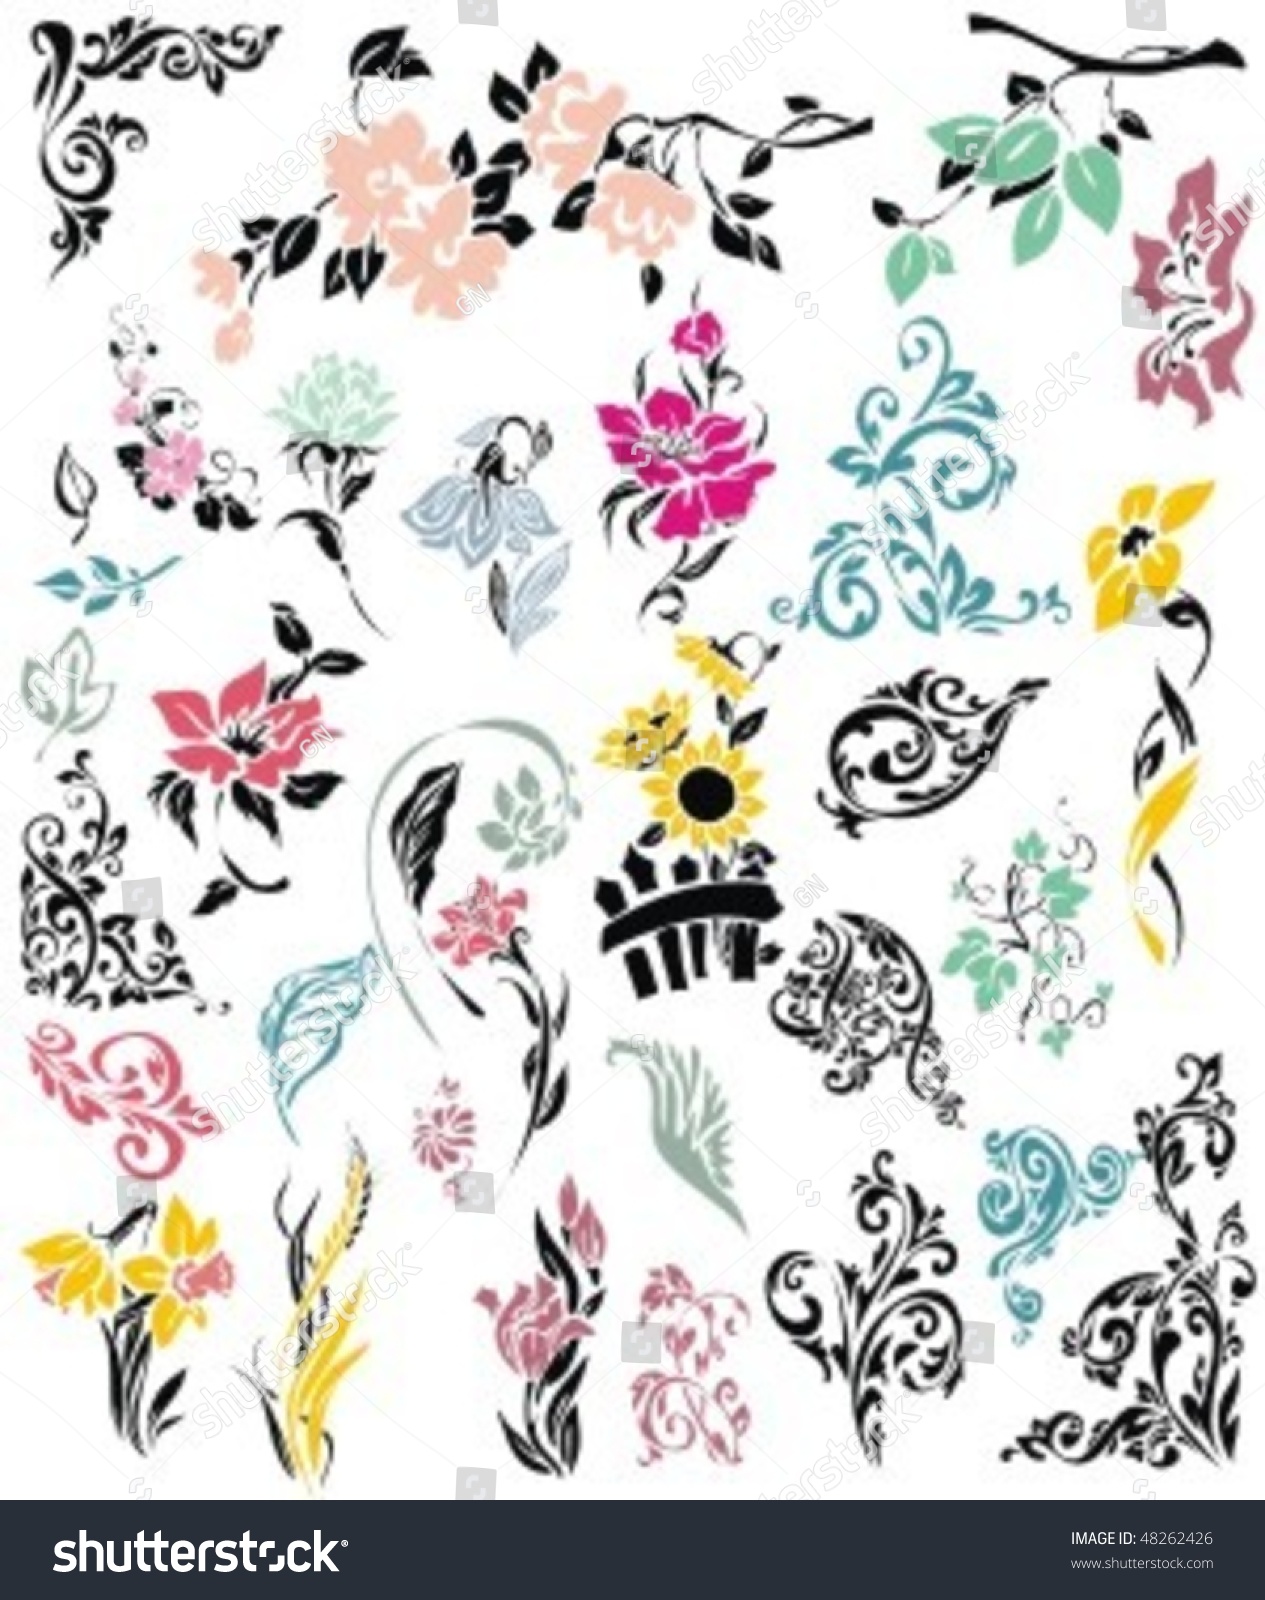 Vector Set Of Flower Ornaments And Patterns - 48262426 : Shutterstock